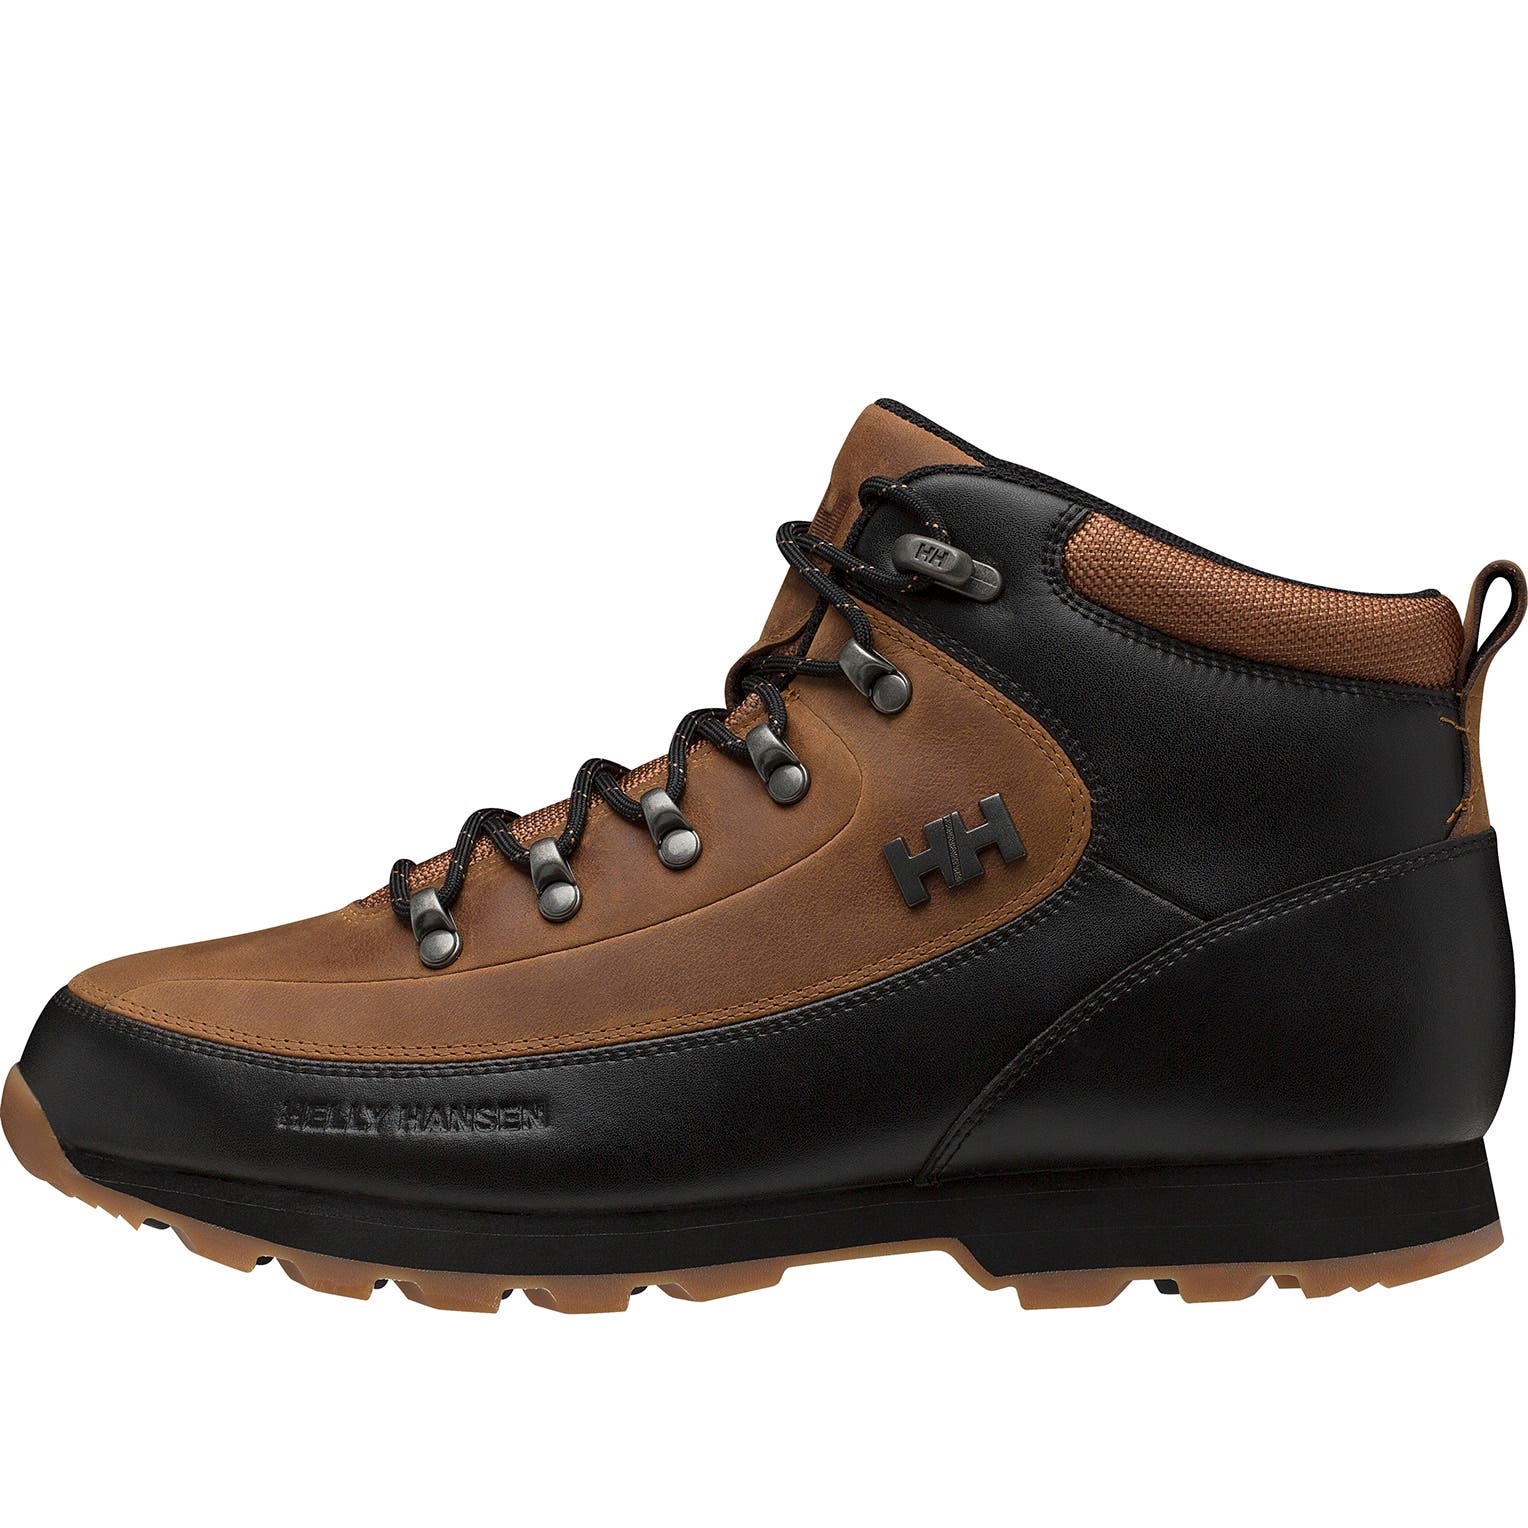 Helly Hansen Men's The Forester Winter Boot in Honey Wheat-Black-Soc from the side